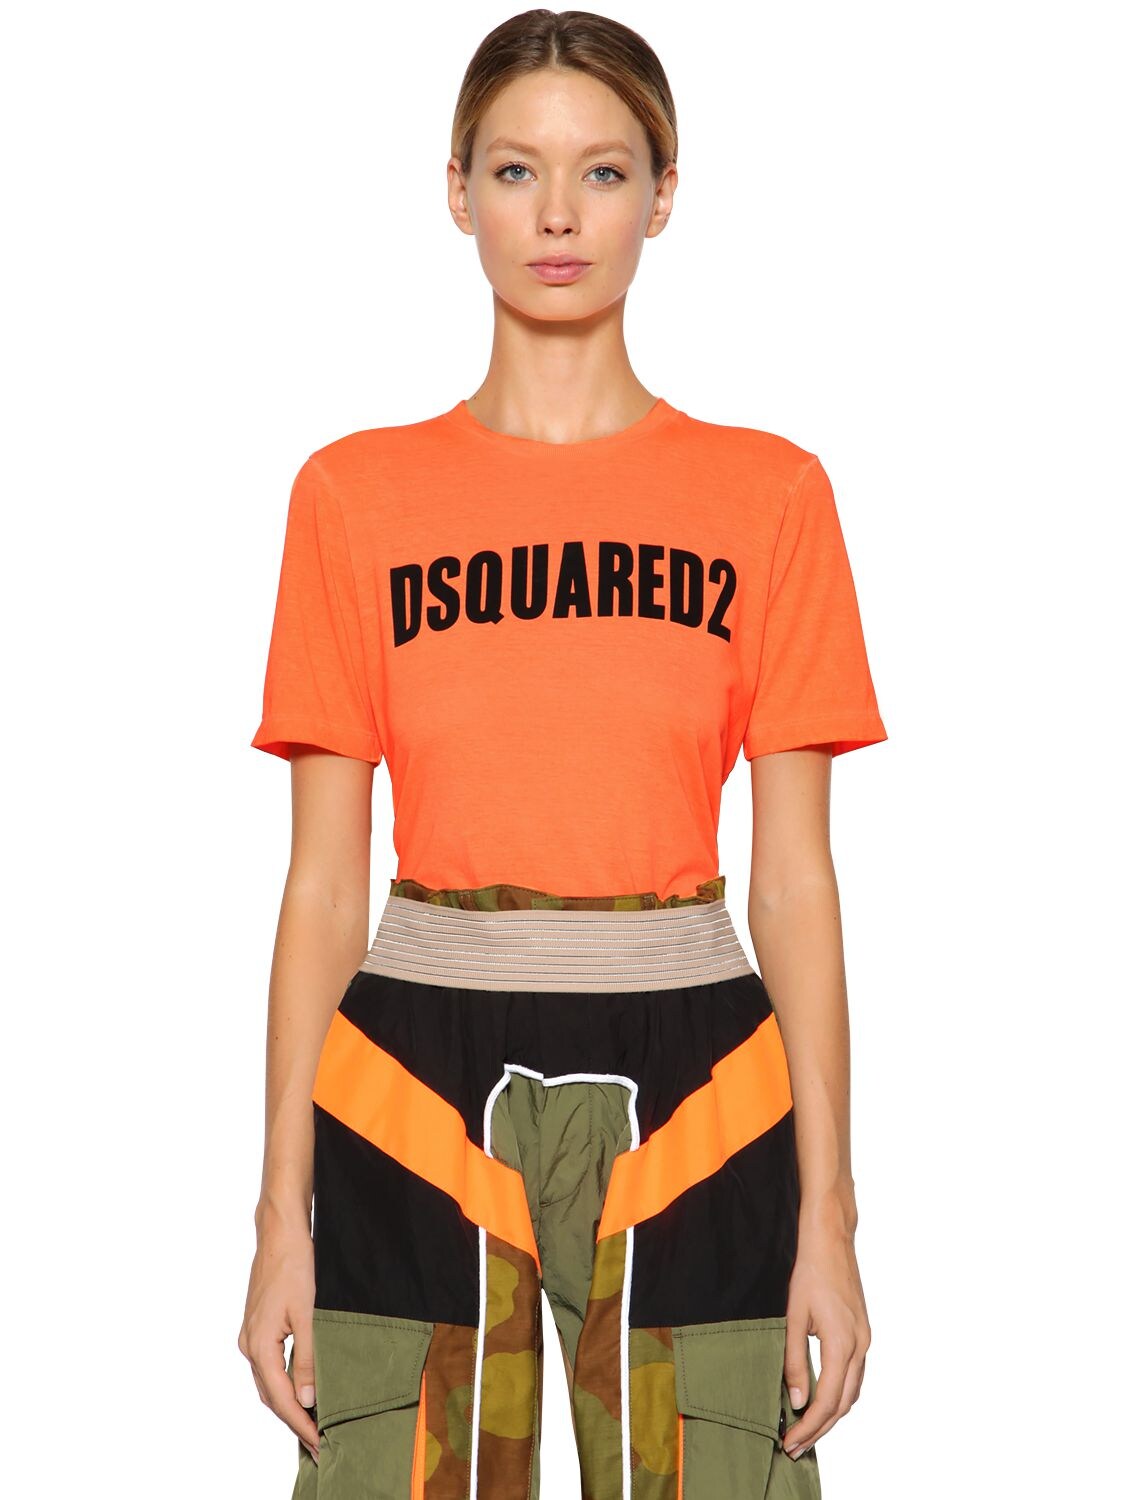 DSQUARED2 LOGO PRINTED COTTON JERSEY T-SHIRT,69IAGF010-OTE00